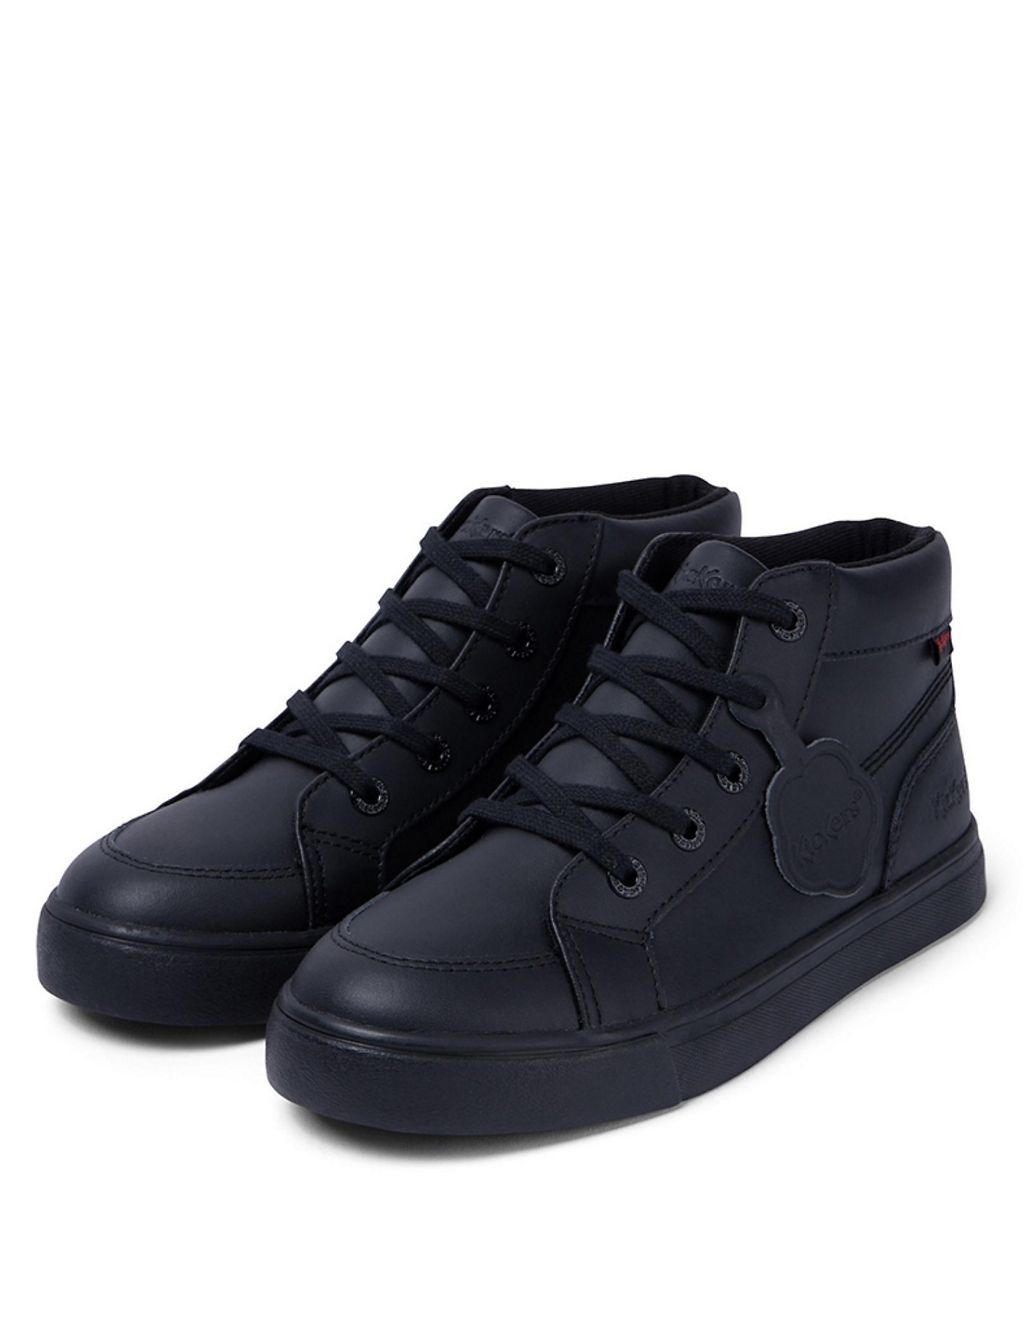 Kids' Leather High Top School Shoes 1 of 4